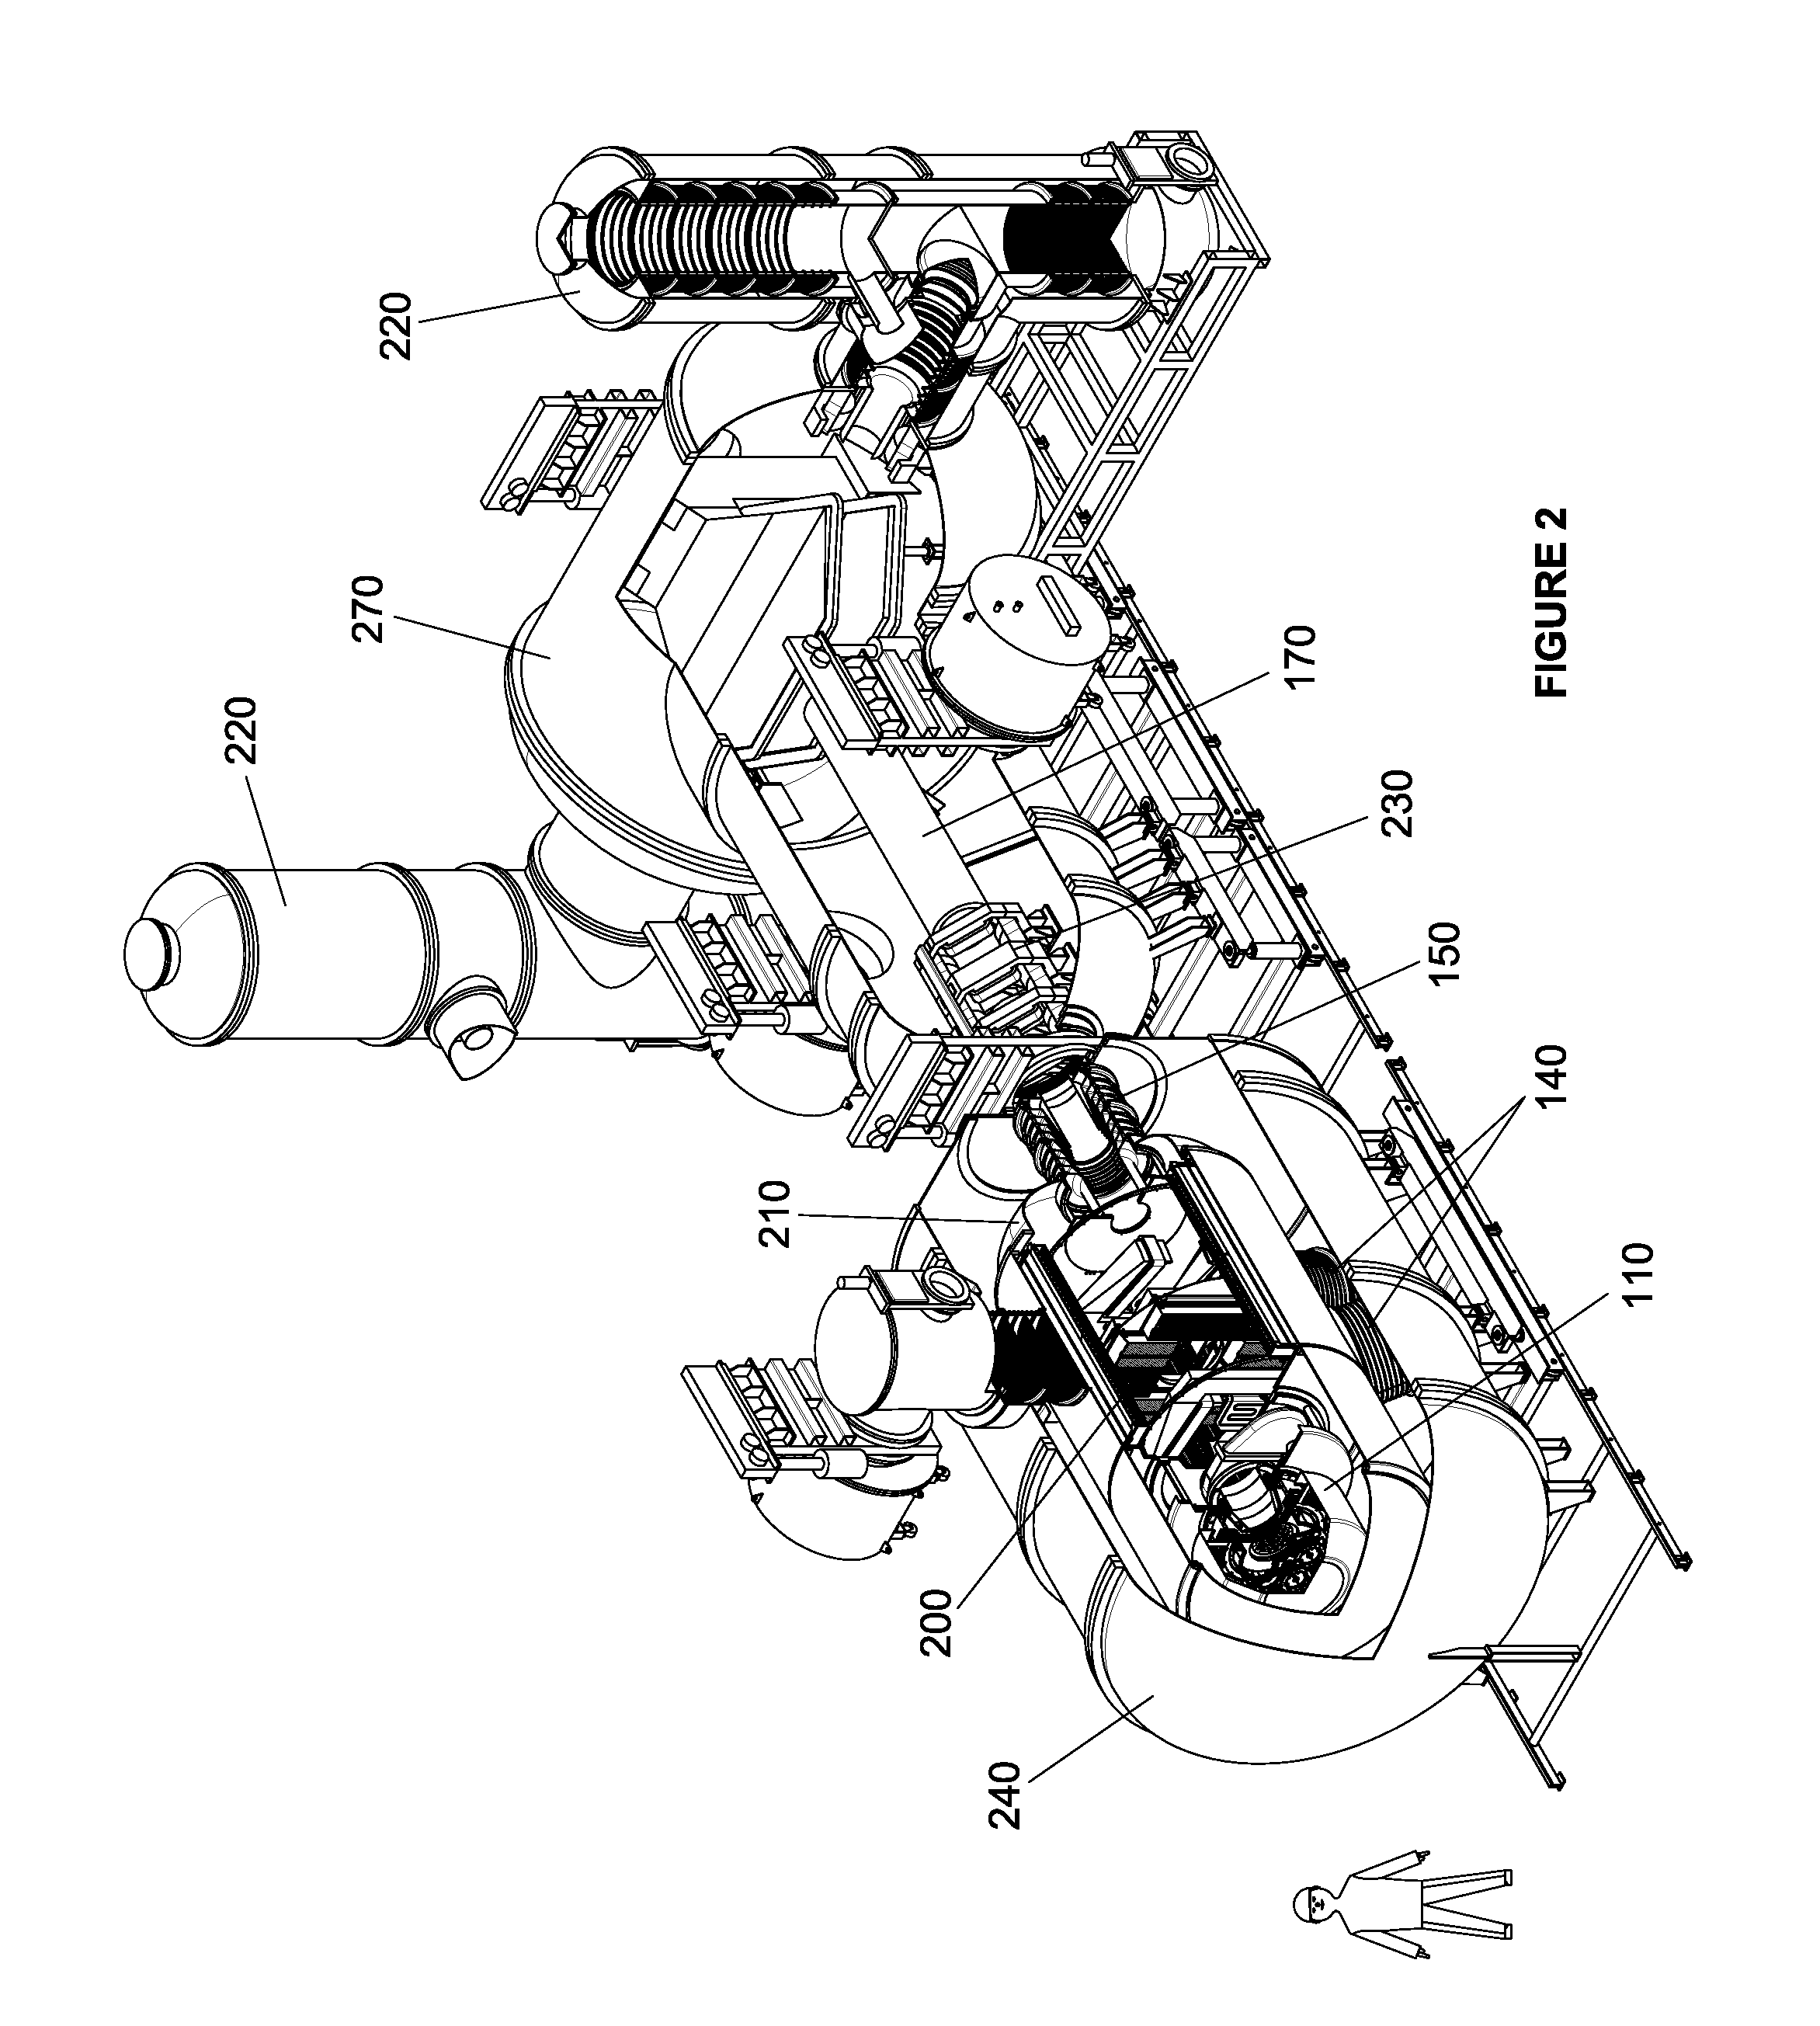 Negative ion-based neutral beam injector